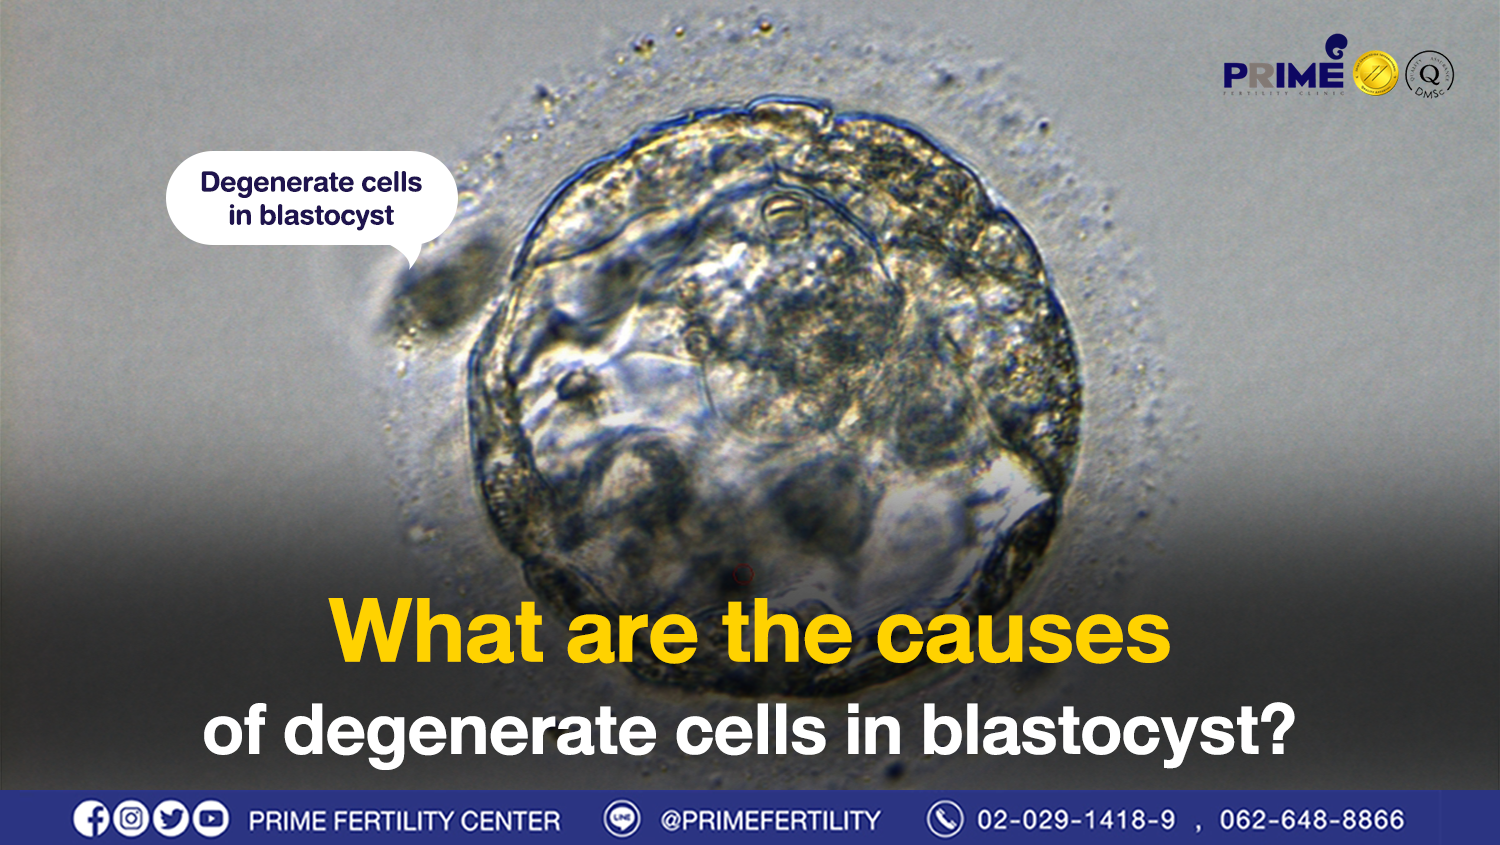 What are causes of degenerate cells in blastocyst?